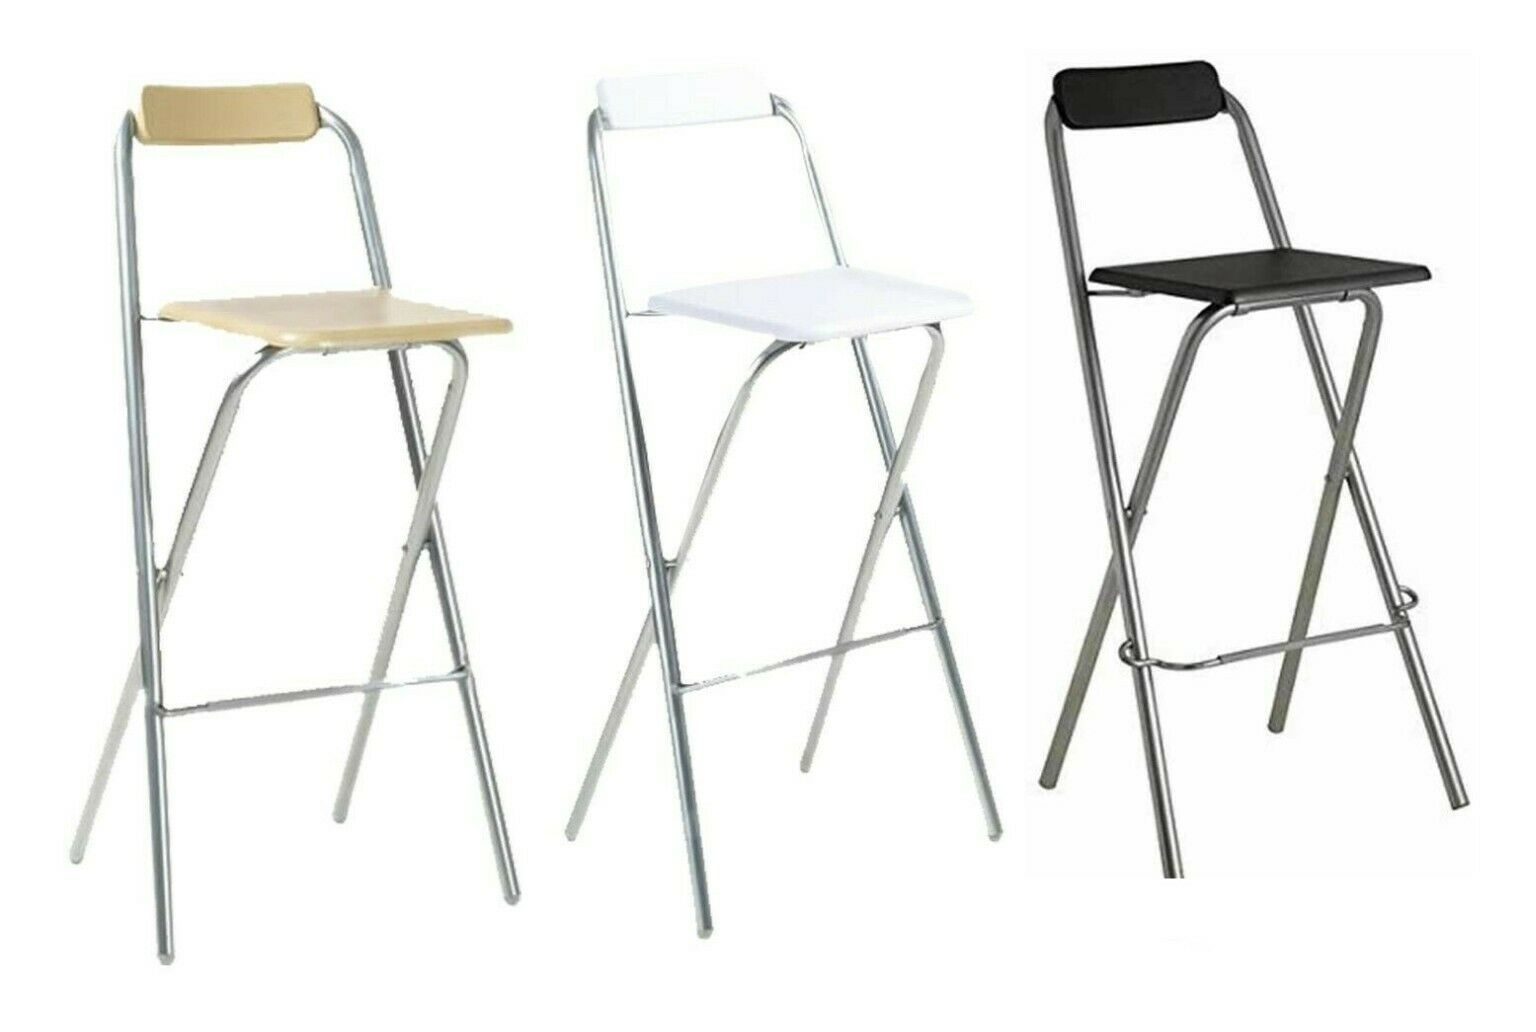 Folding Stool Chair For Breakfast Home Kitchen Office School Cafe Use